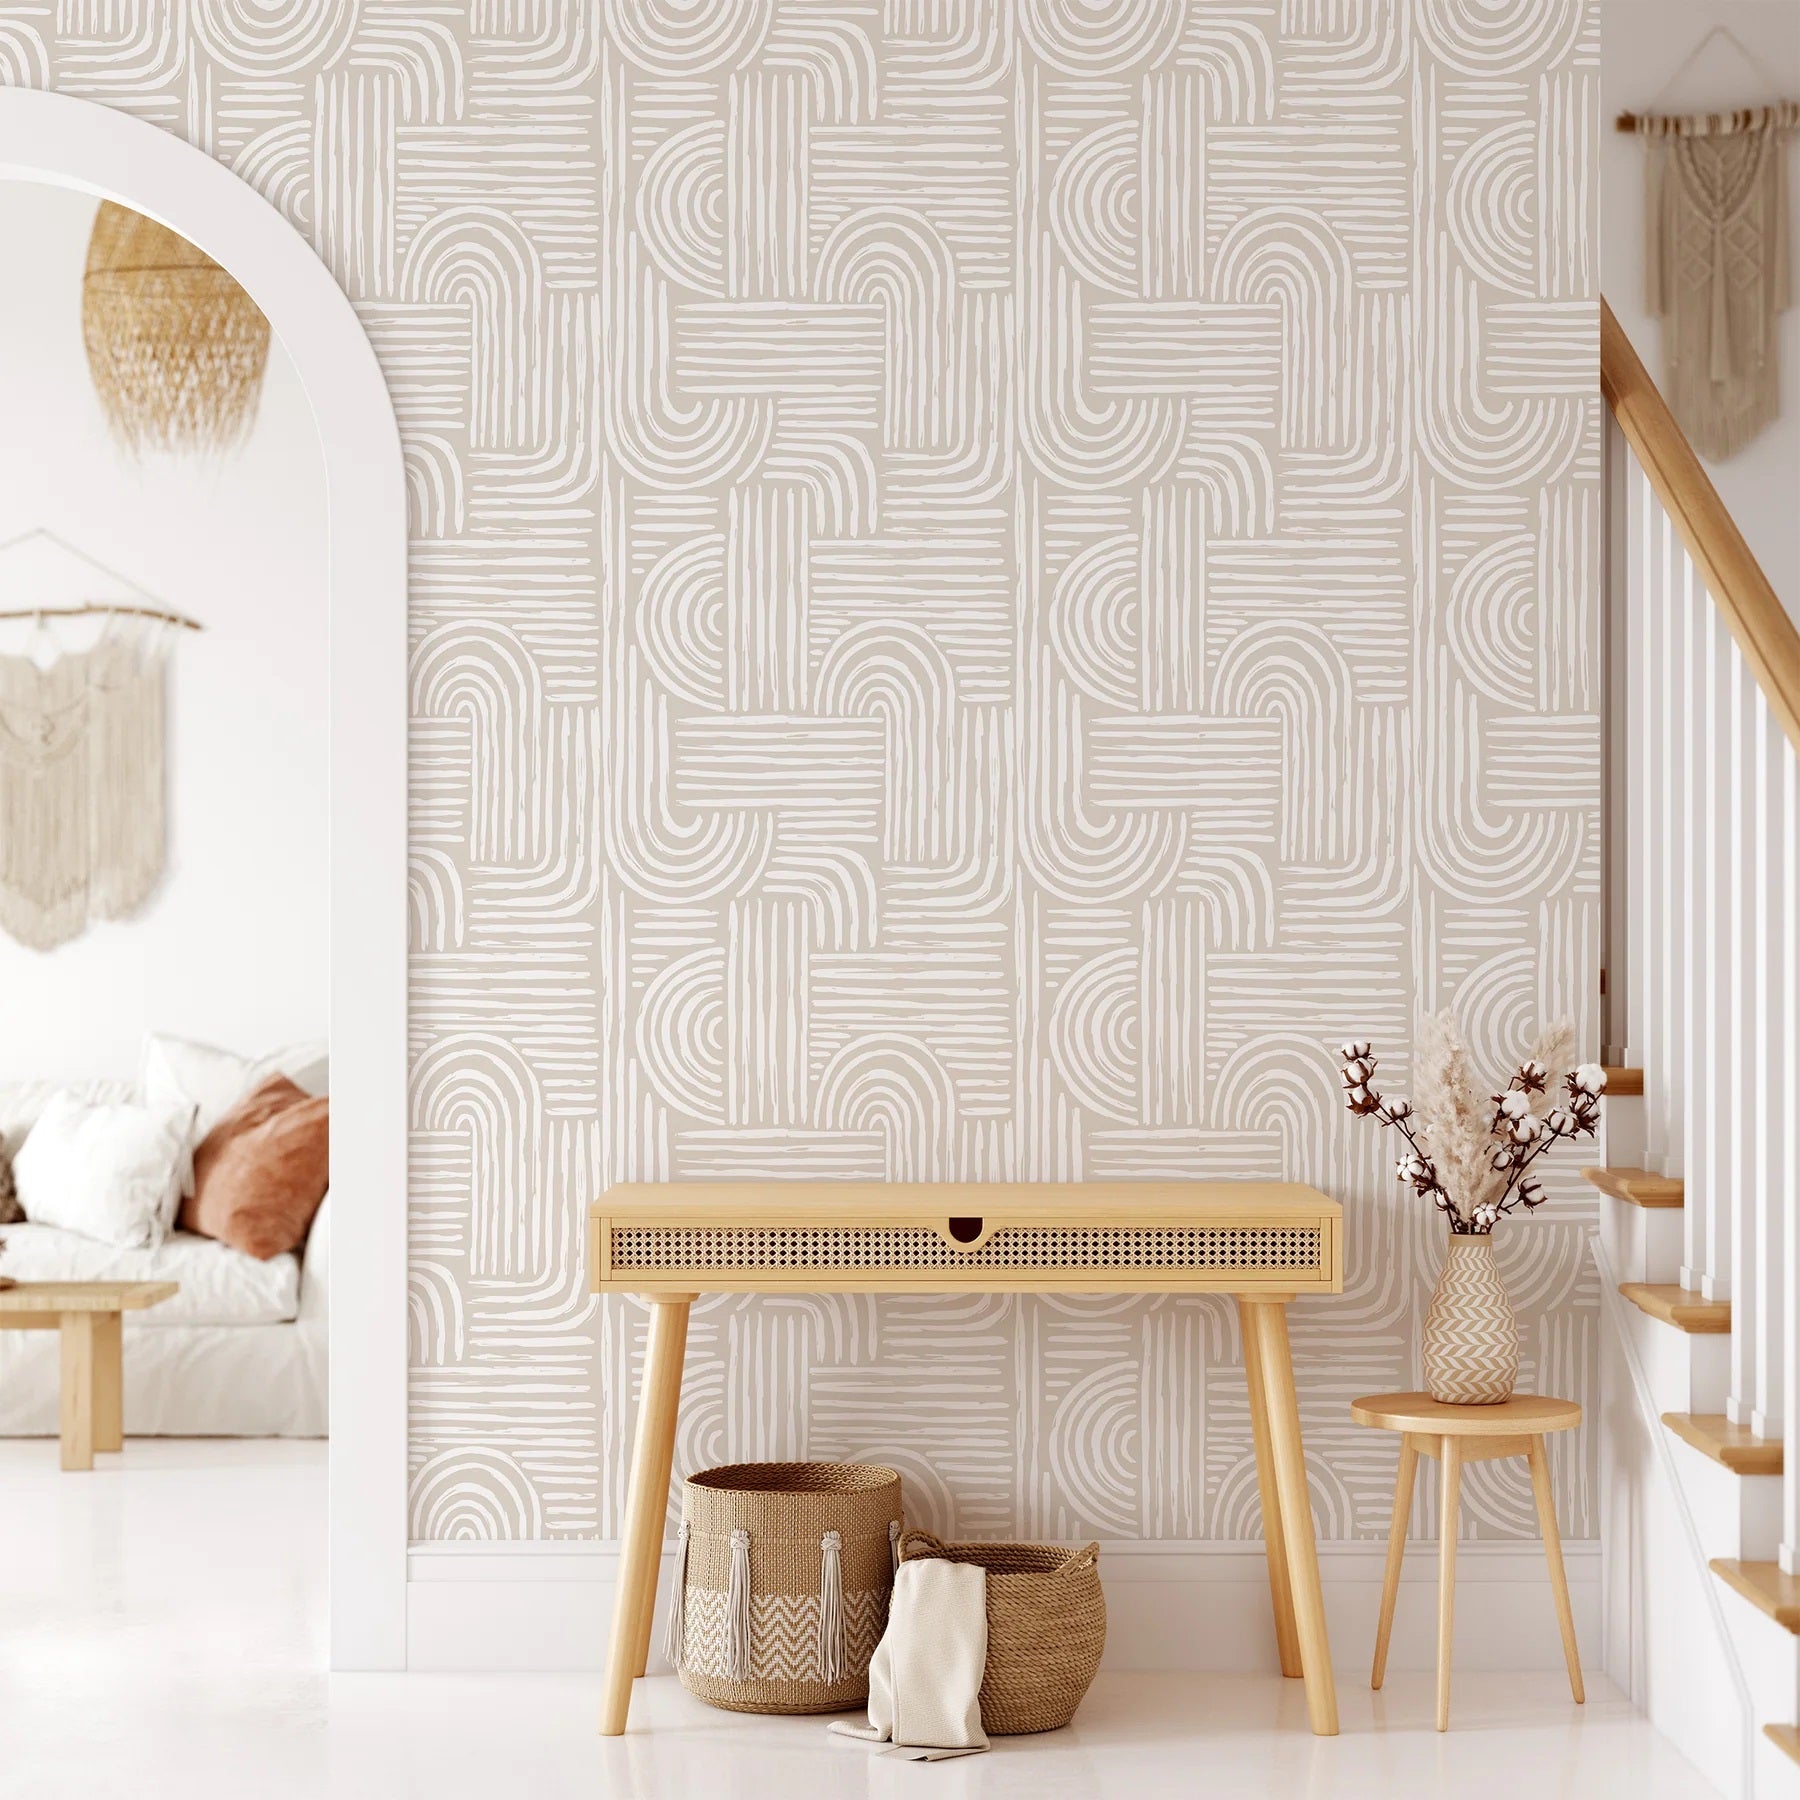 Top 5 Boho Wallpaper Trends by CostaCover